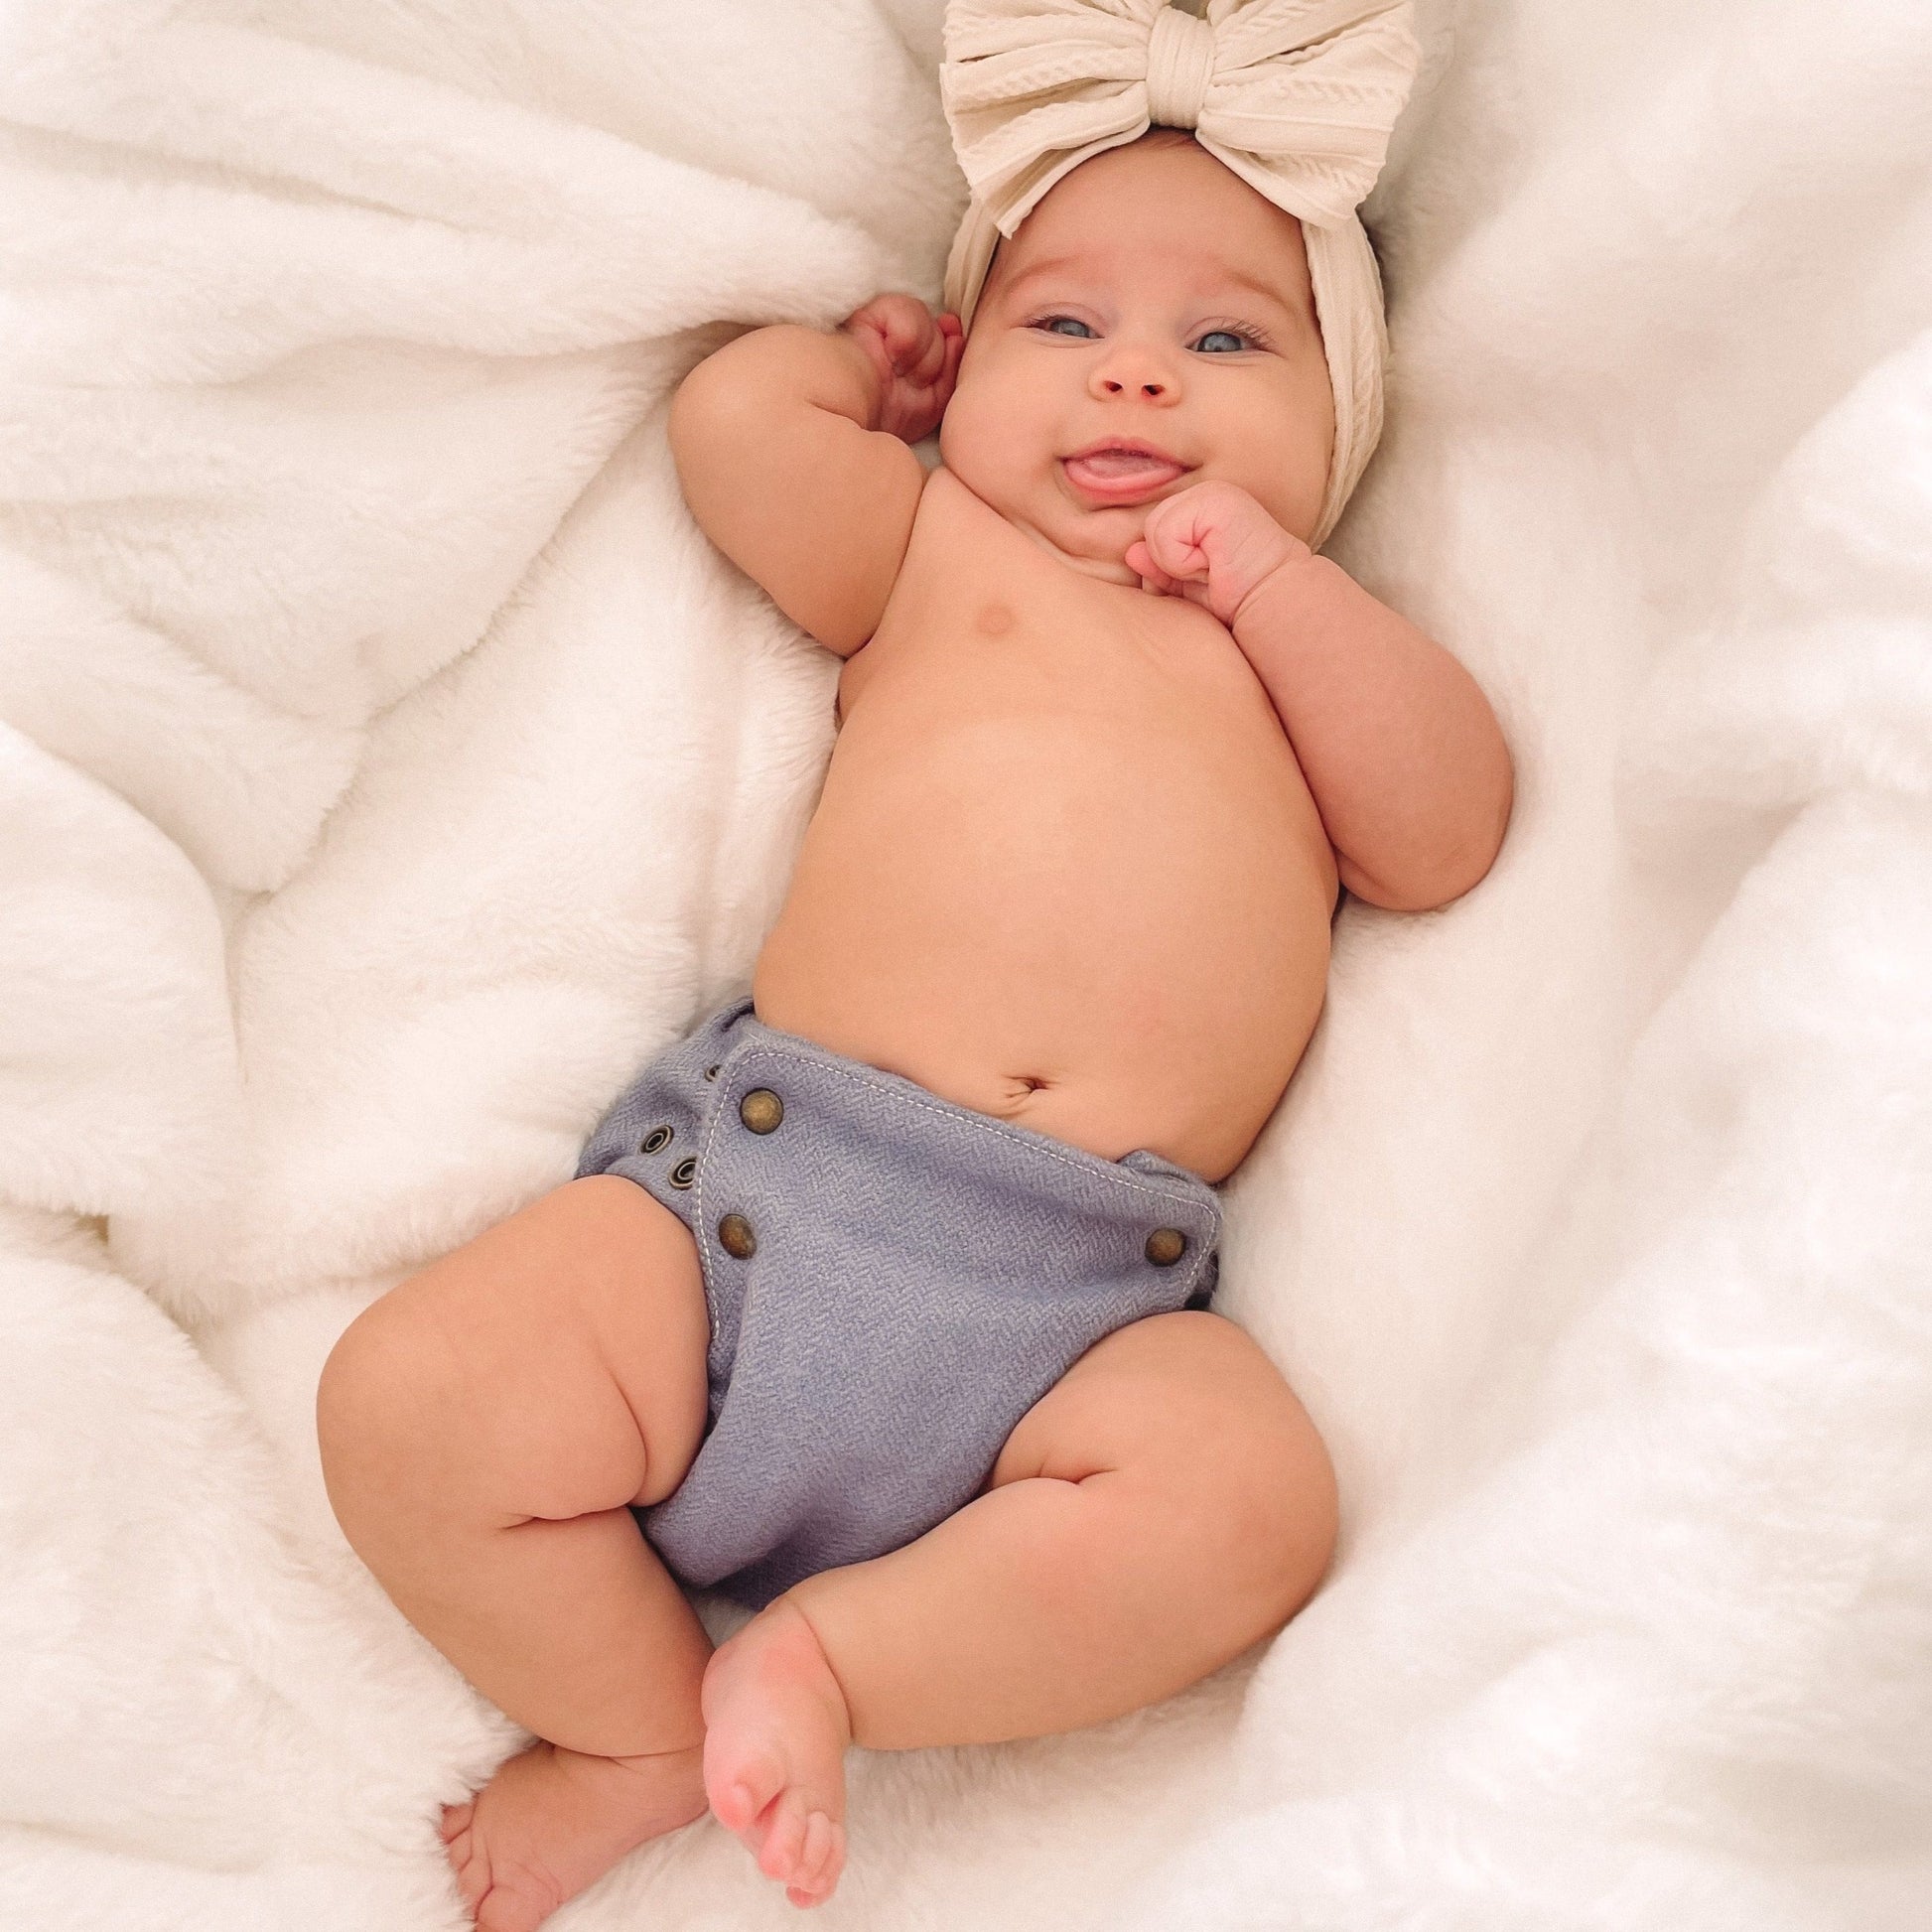 A smiling baby with medium skin tone wearing a cream colored bow around her head plus a dawn-colored alpaca diaper cover with brass snaps. She is laying on top of a plush white blanket.